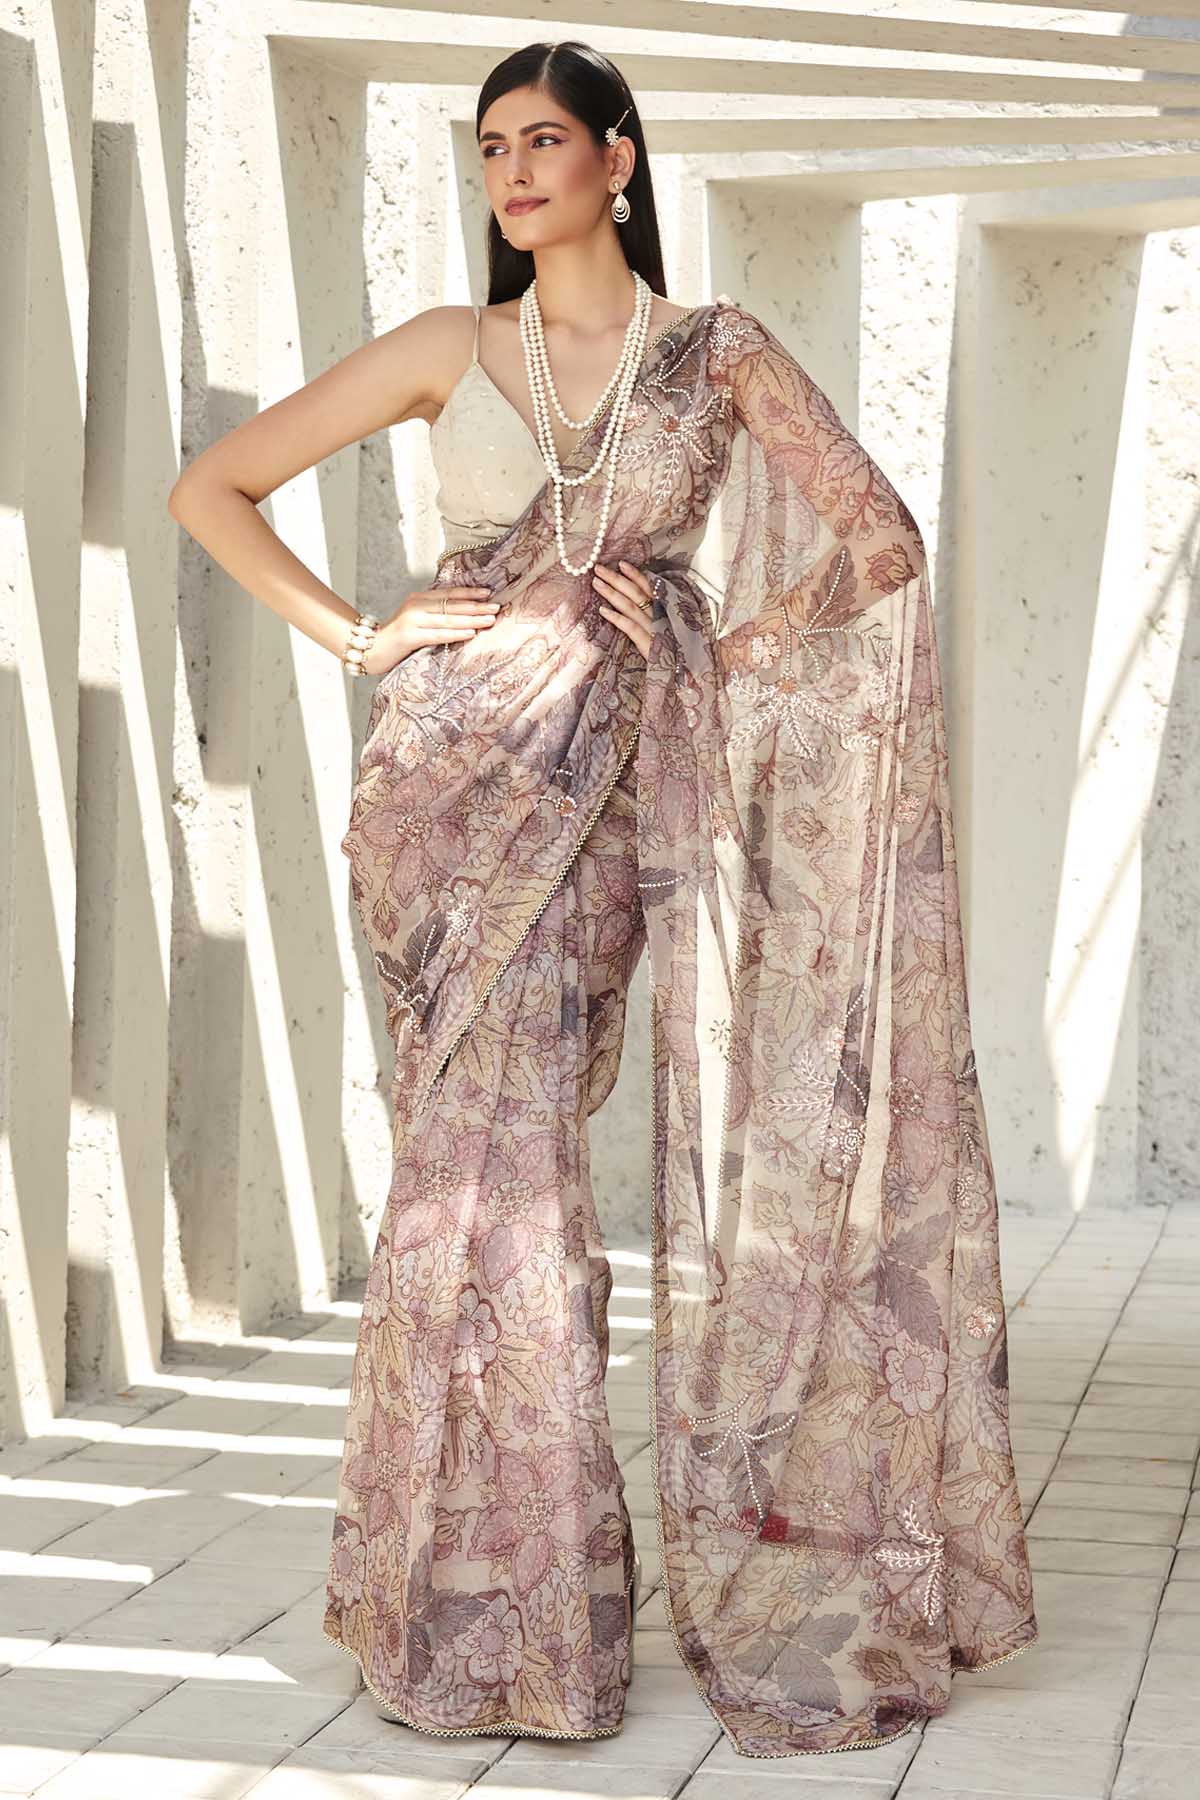 Designer Ranian Light fawn printed organza saree with cutdana, pipe, stone and sequins embroidery with a strap corset blouse For women Online at ScrollnShops